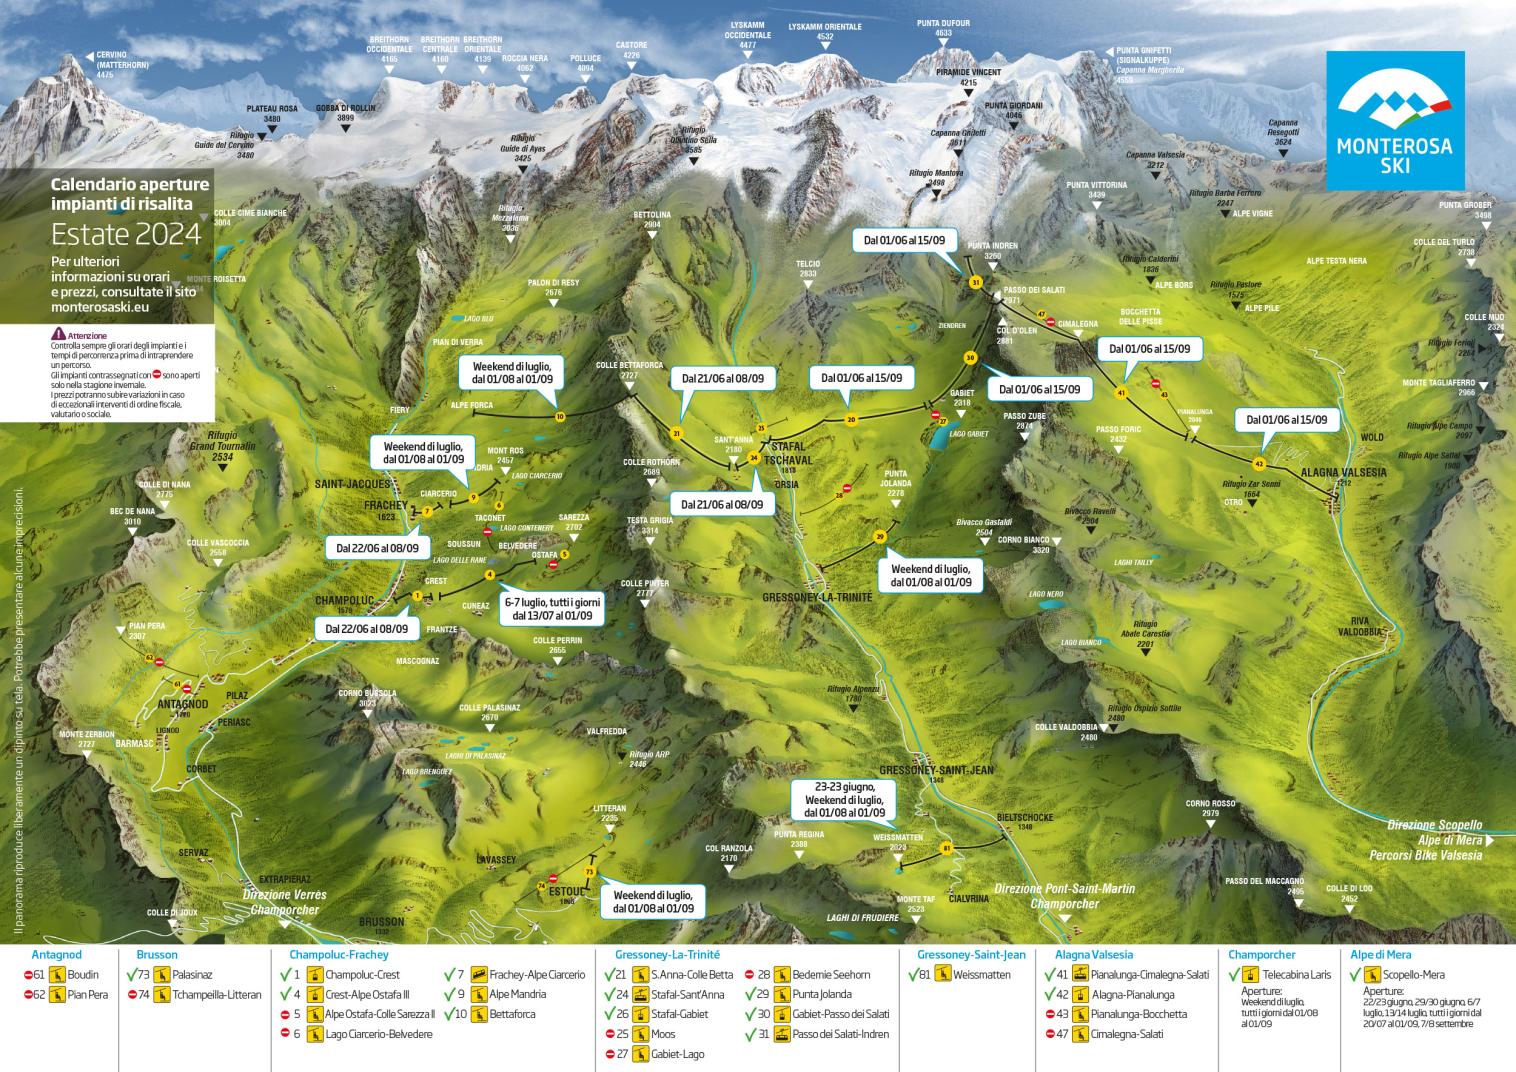 Map of the lifts with the opening dates